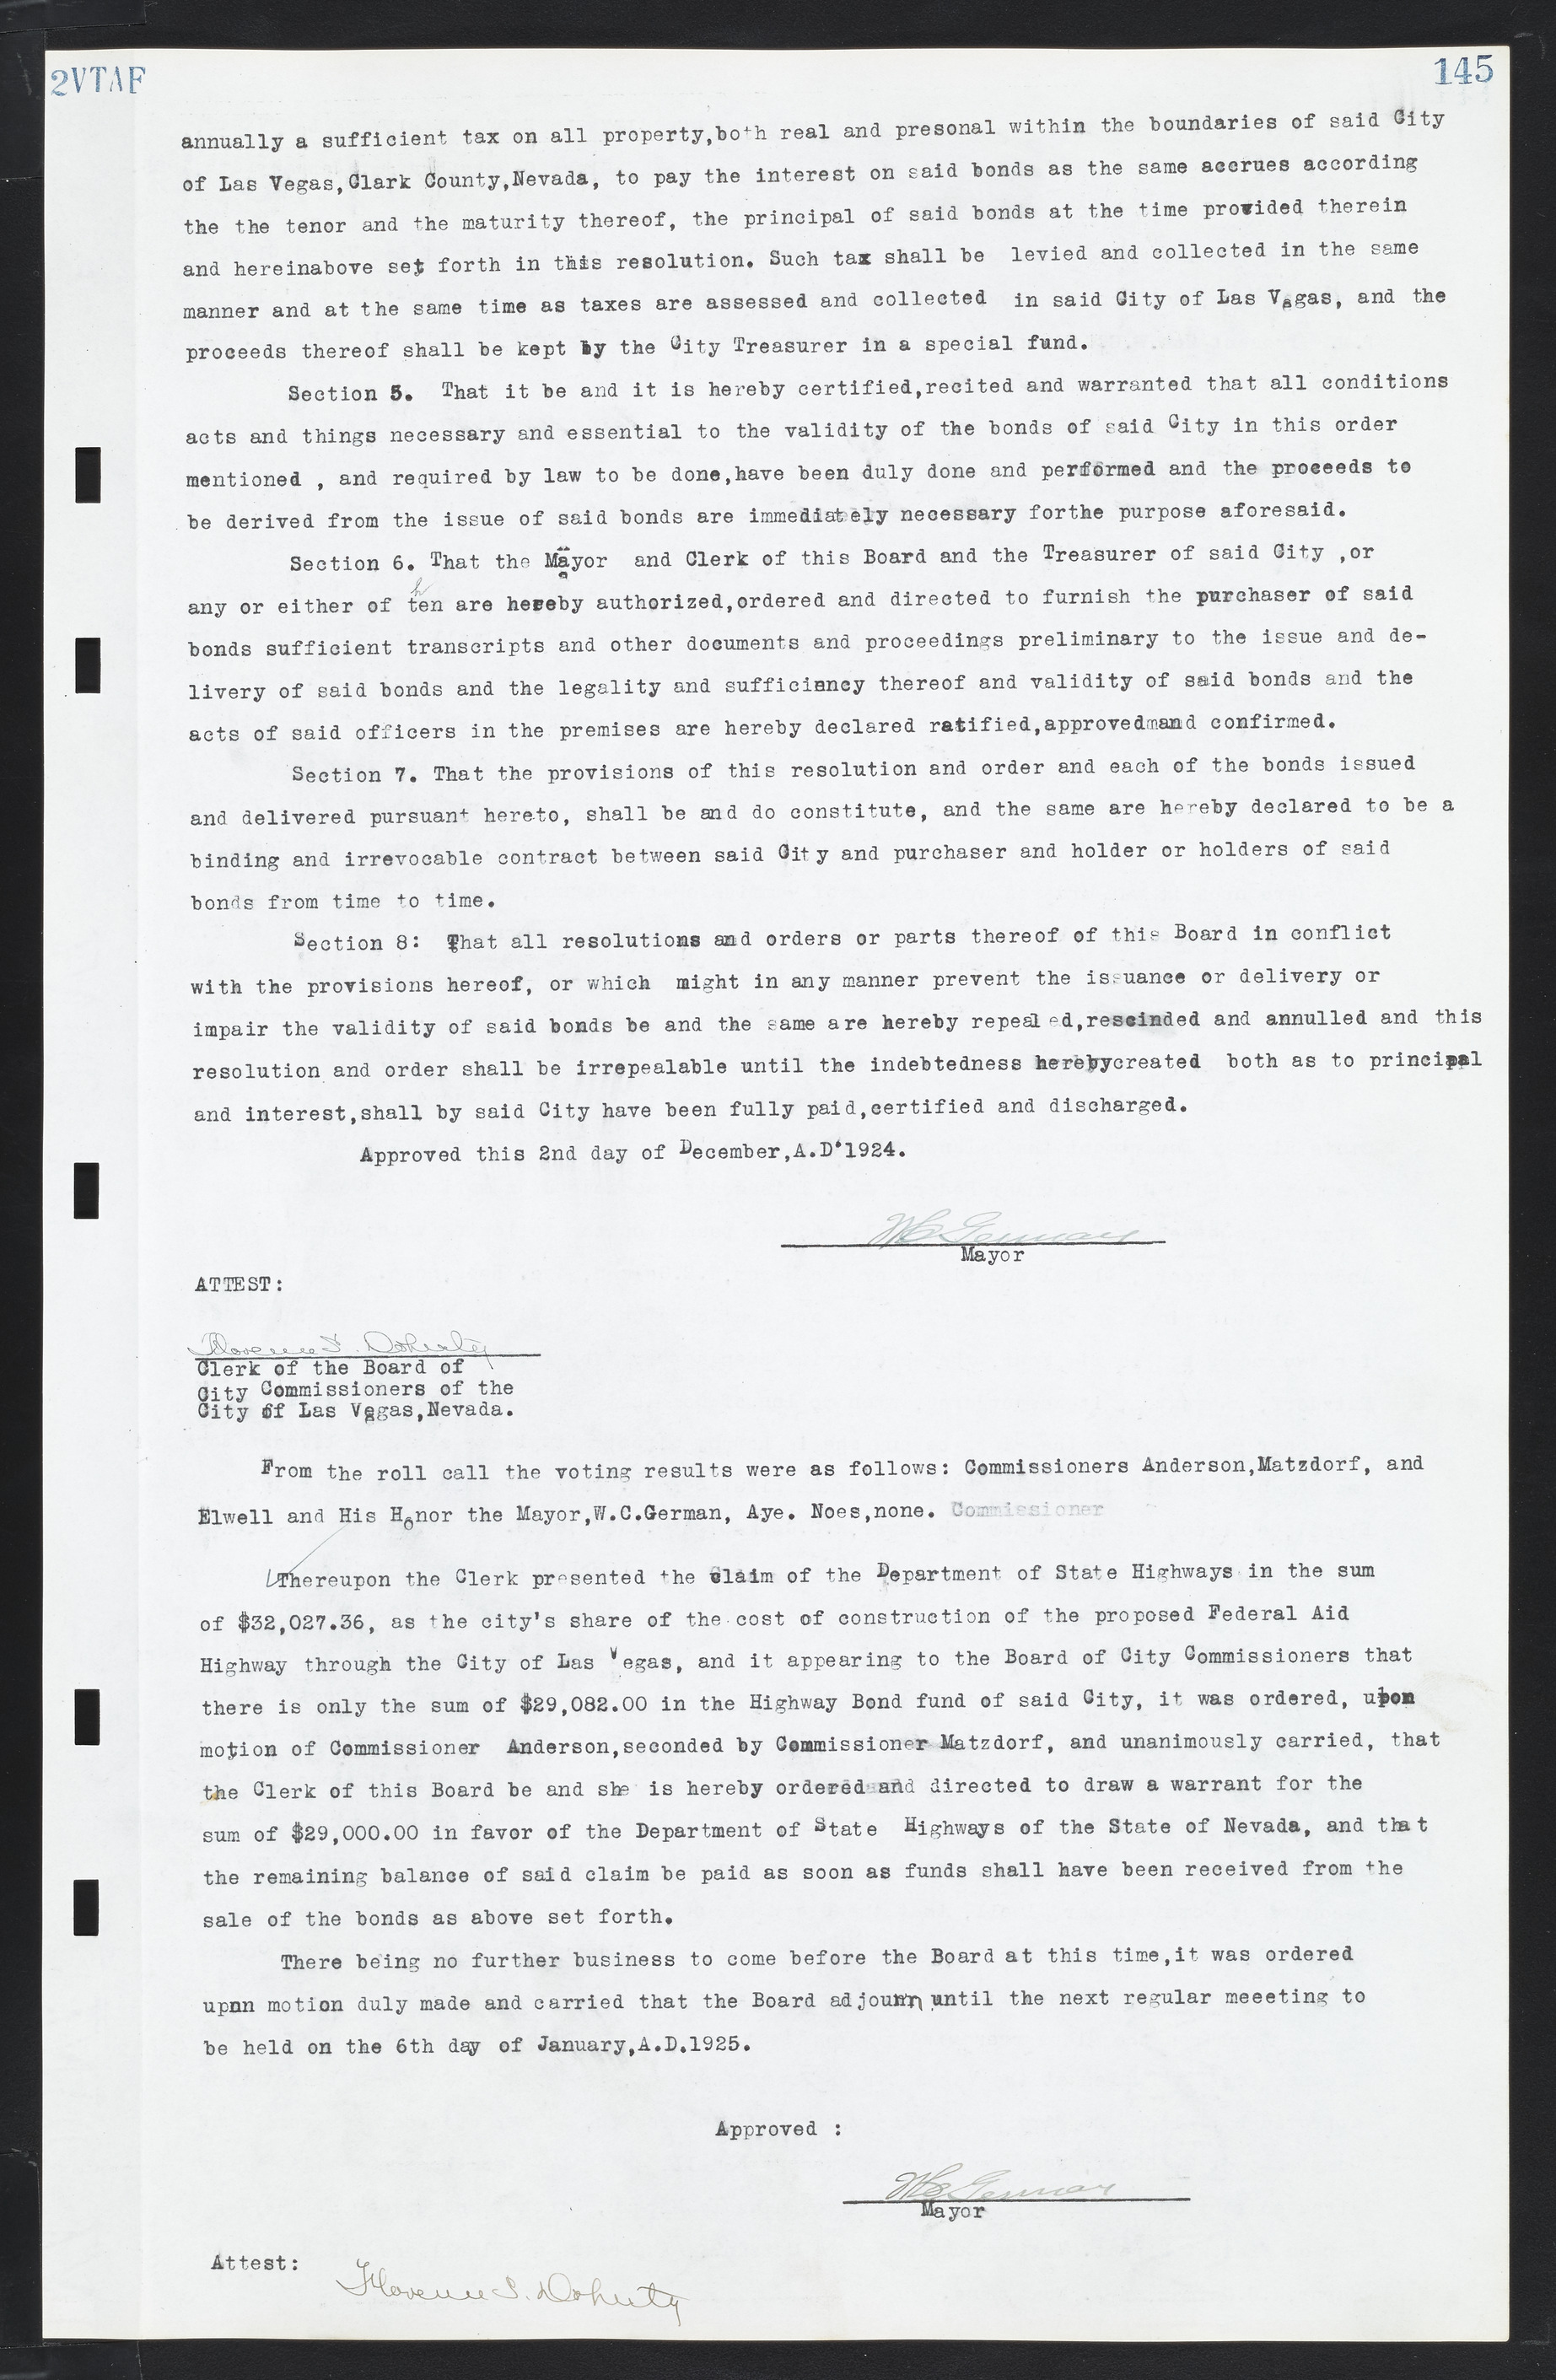 Las Vegas City Commission Minutes, March 1, 1922 to May 10, 1929, lvc000002-152